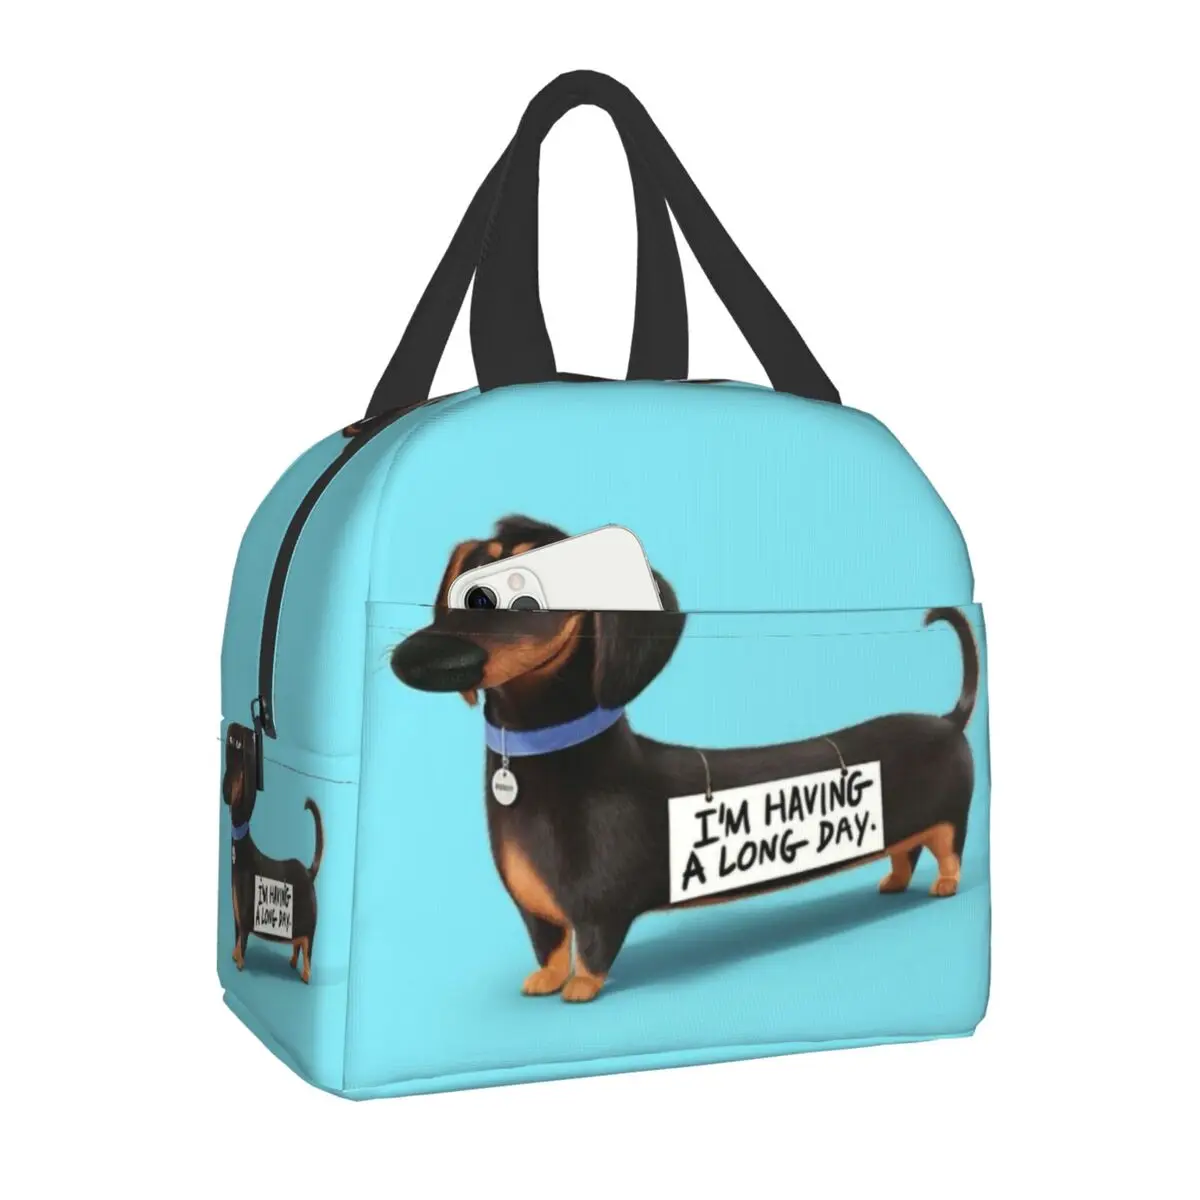 

Dachshund Thermal Insulated Lunch Bags Women Wiener Badger Sausage Dog Resuable Lunch Container for Outdoor Picnic Food Box